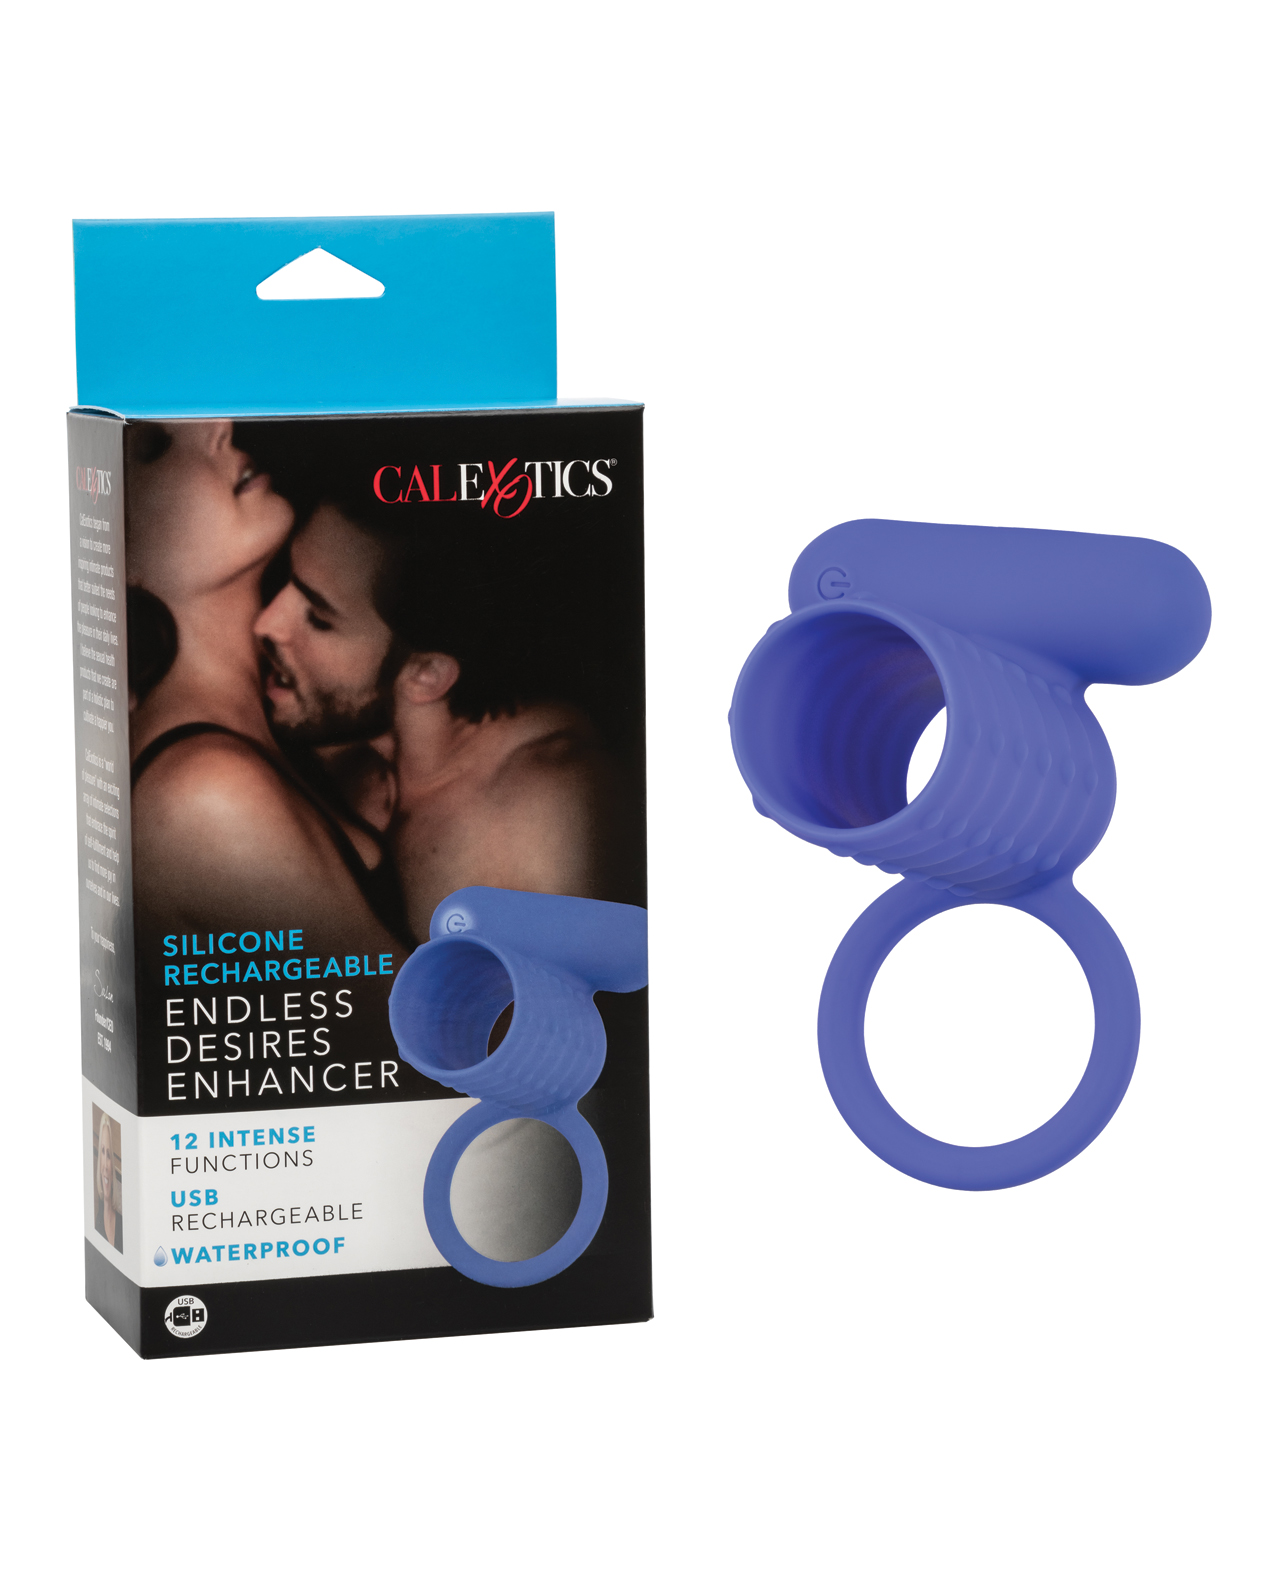 Blue Silicone Rechargeable Endless Desires Enhancer ring sitting next to a box. A couple is on the box.